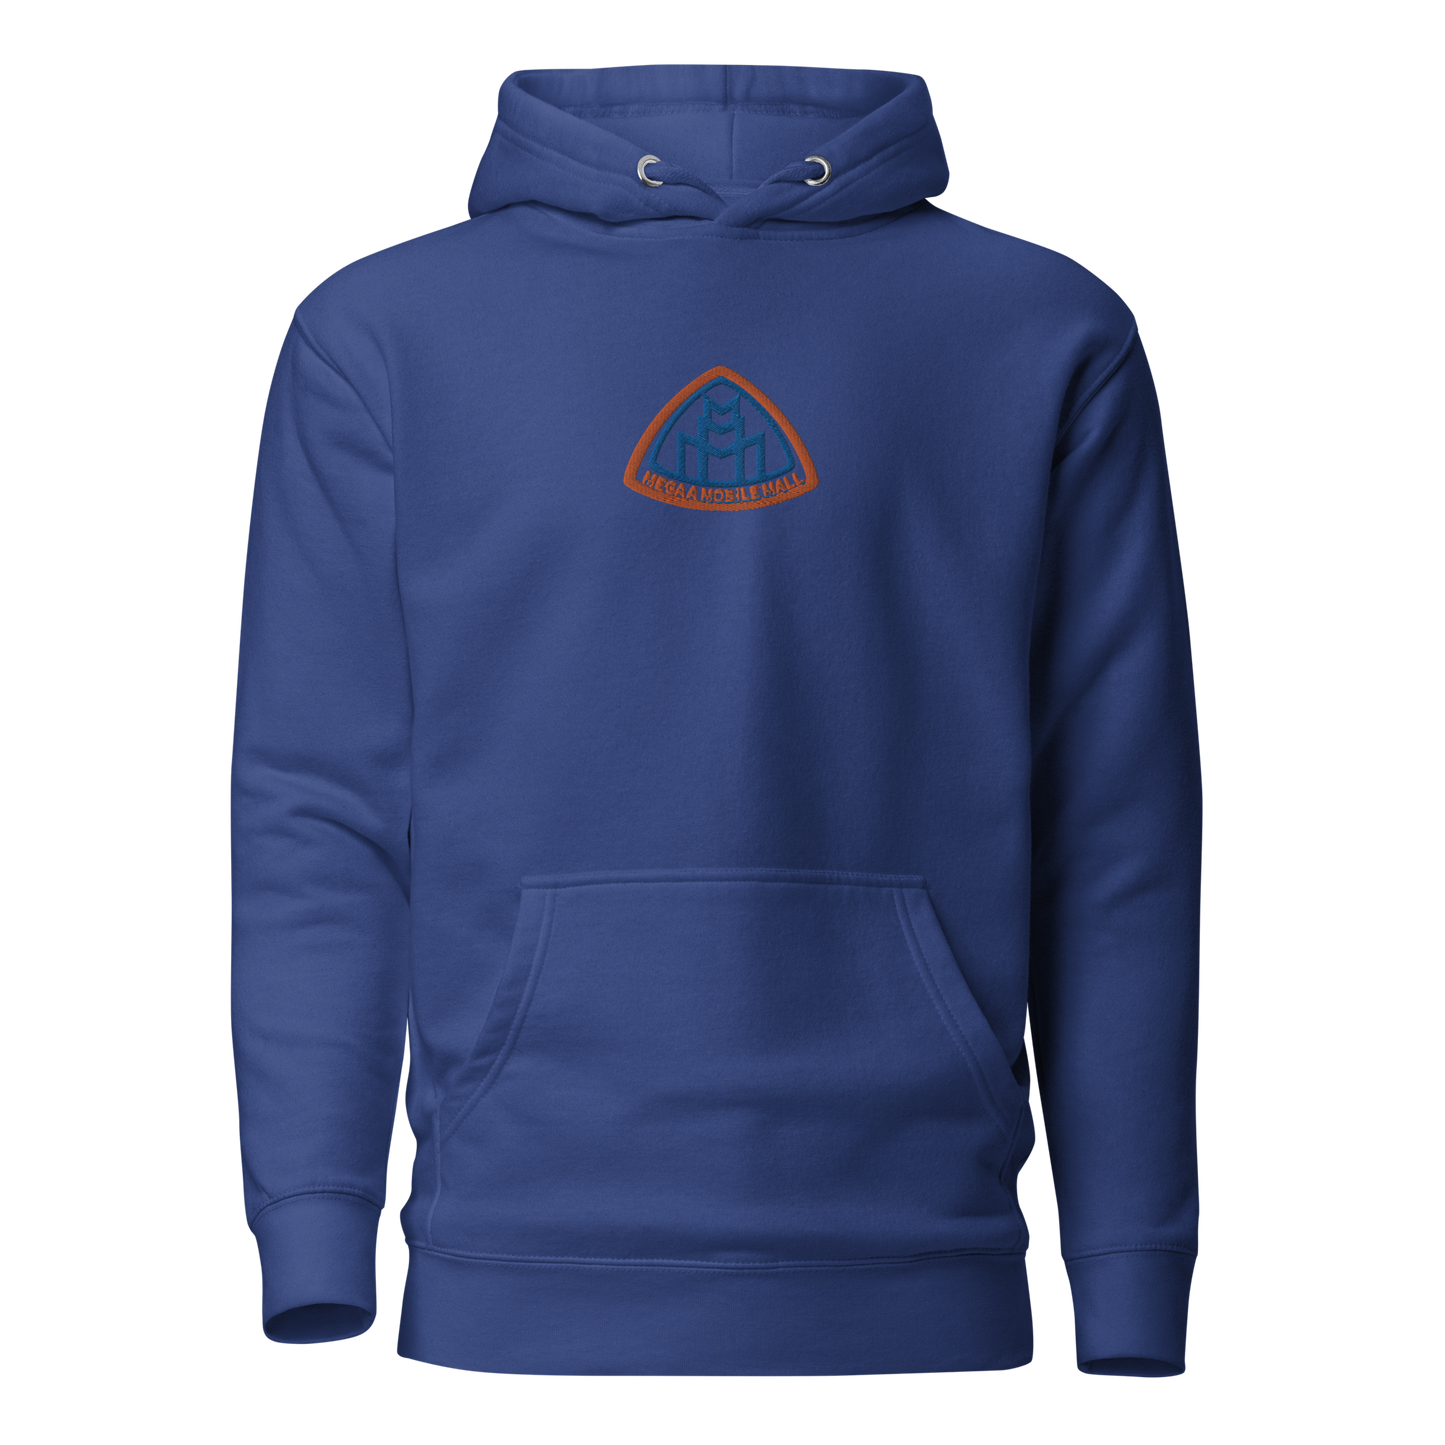 new york colorway megaamobilemall logo stitched blue hoodie